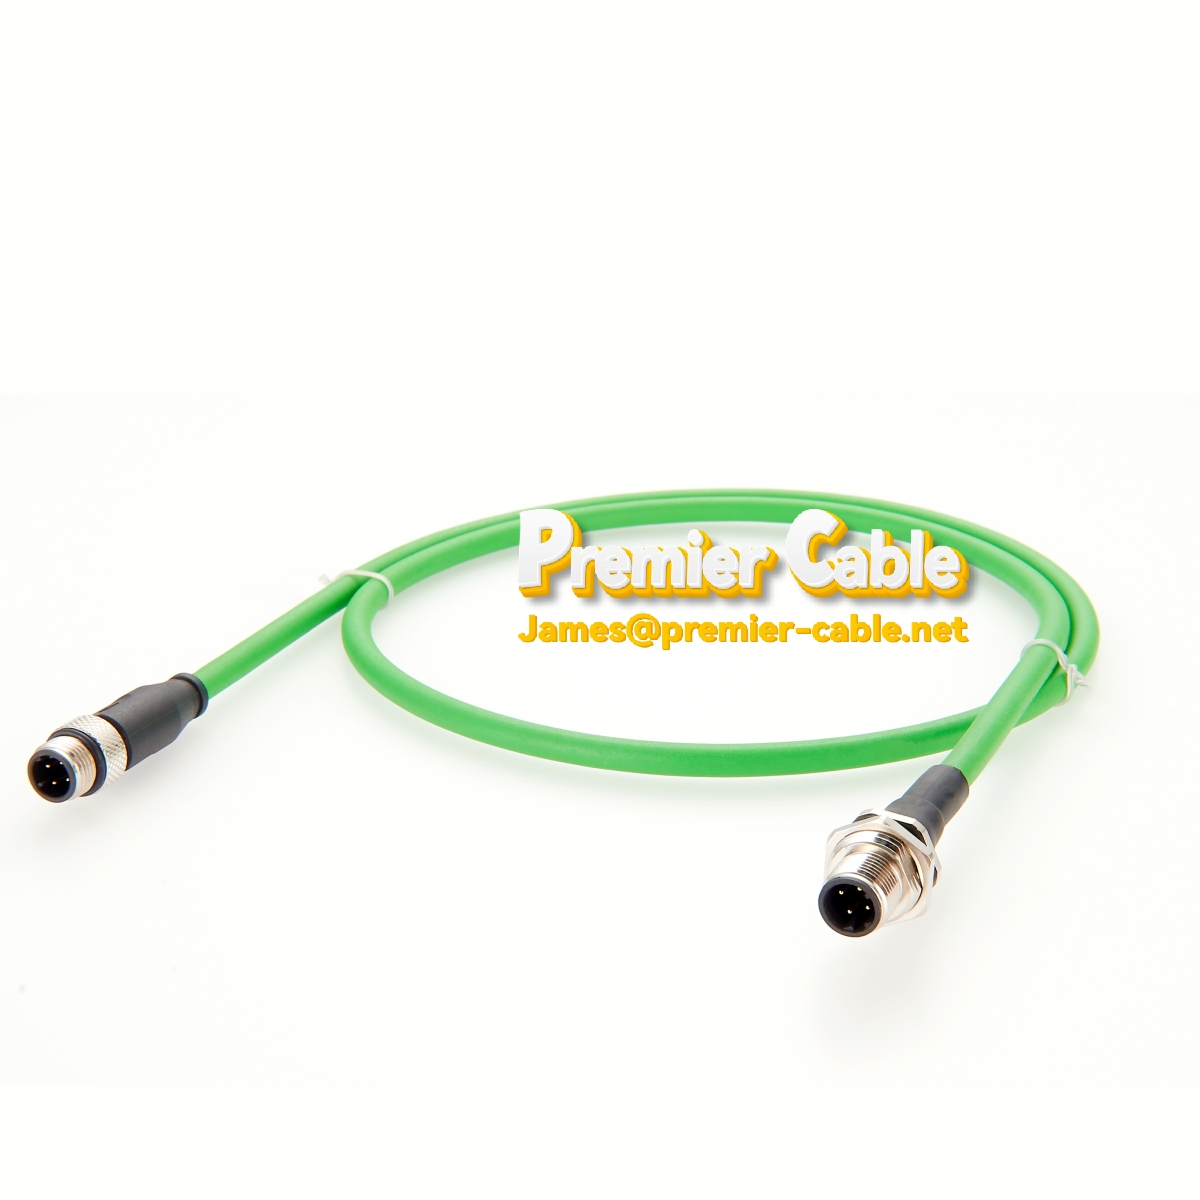 Patchcords and Cable RJ45 to M12 flange Circular Connector Profinet 